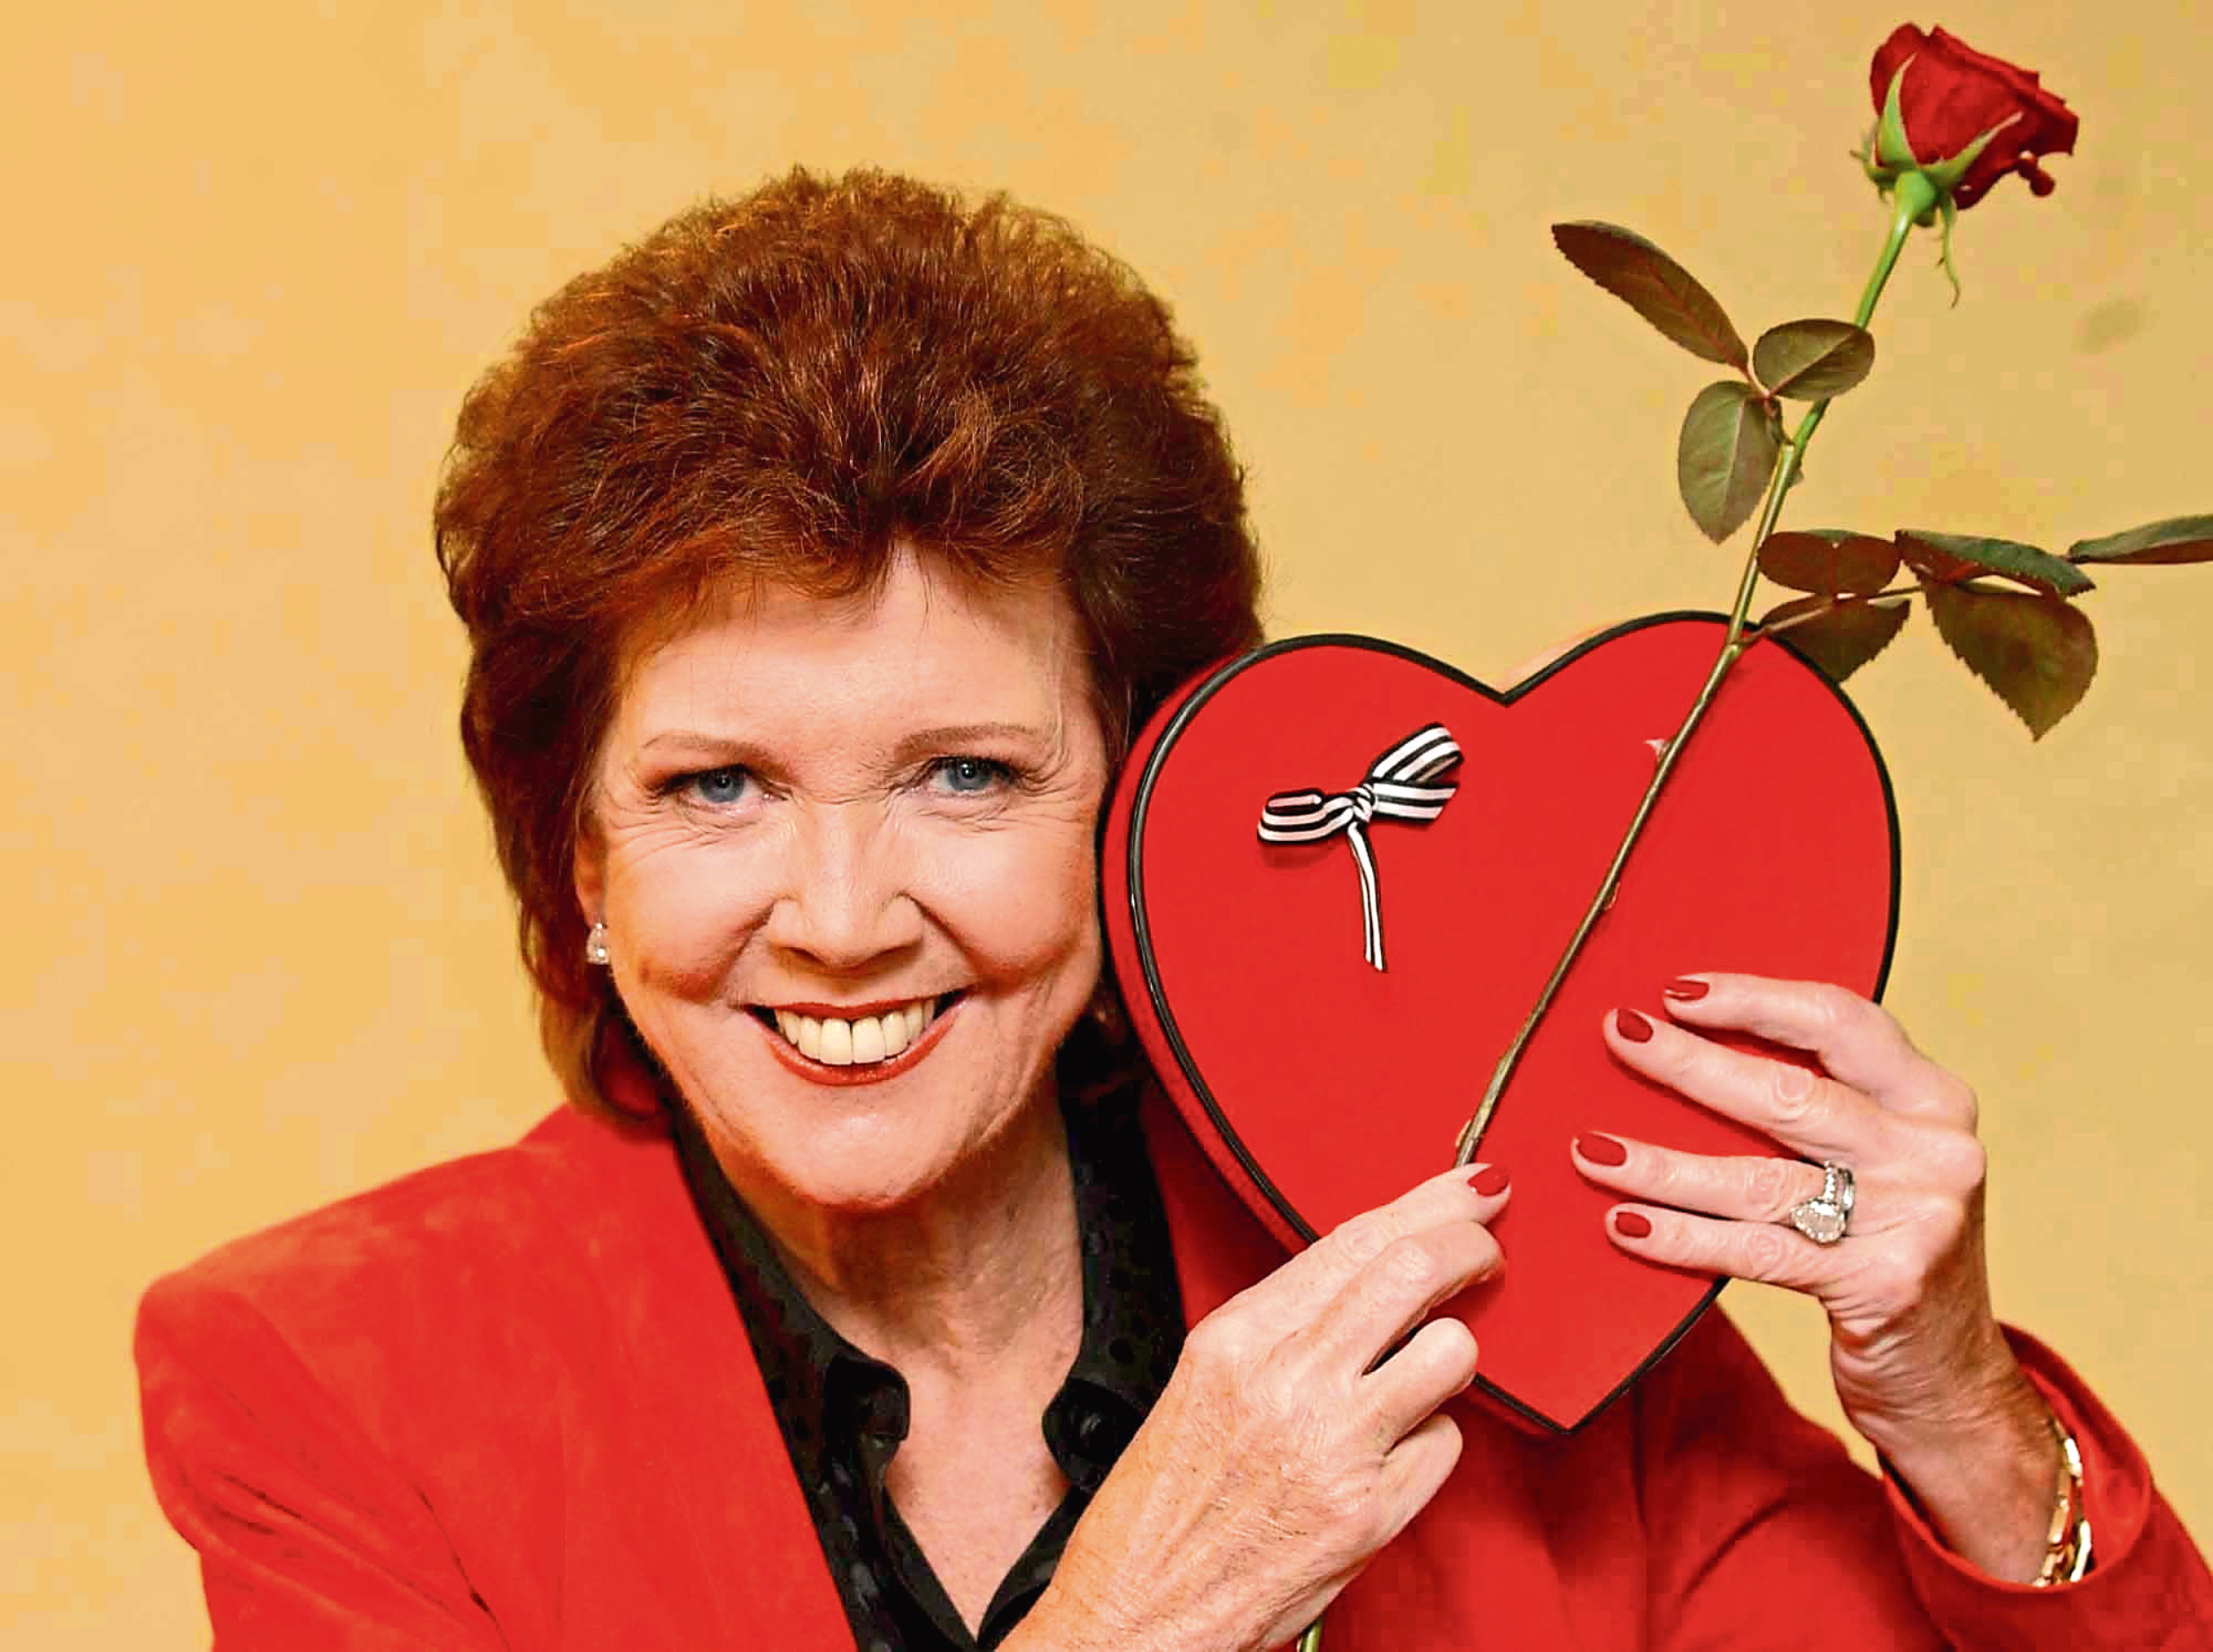 Cilla’s role as Blind Date host won her a new generation of fans